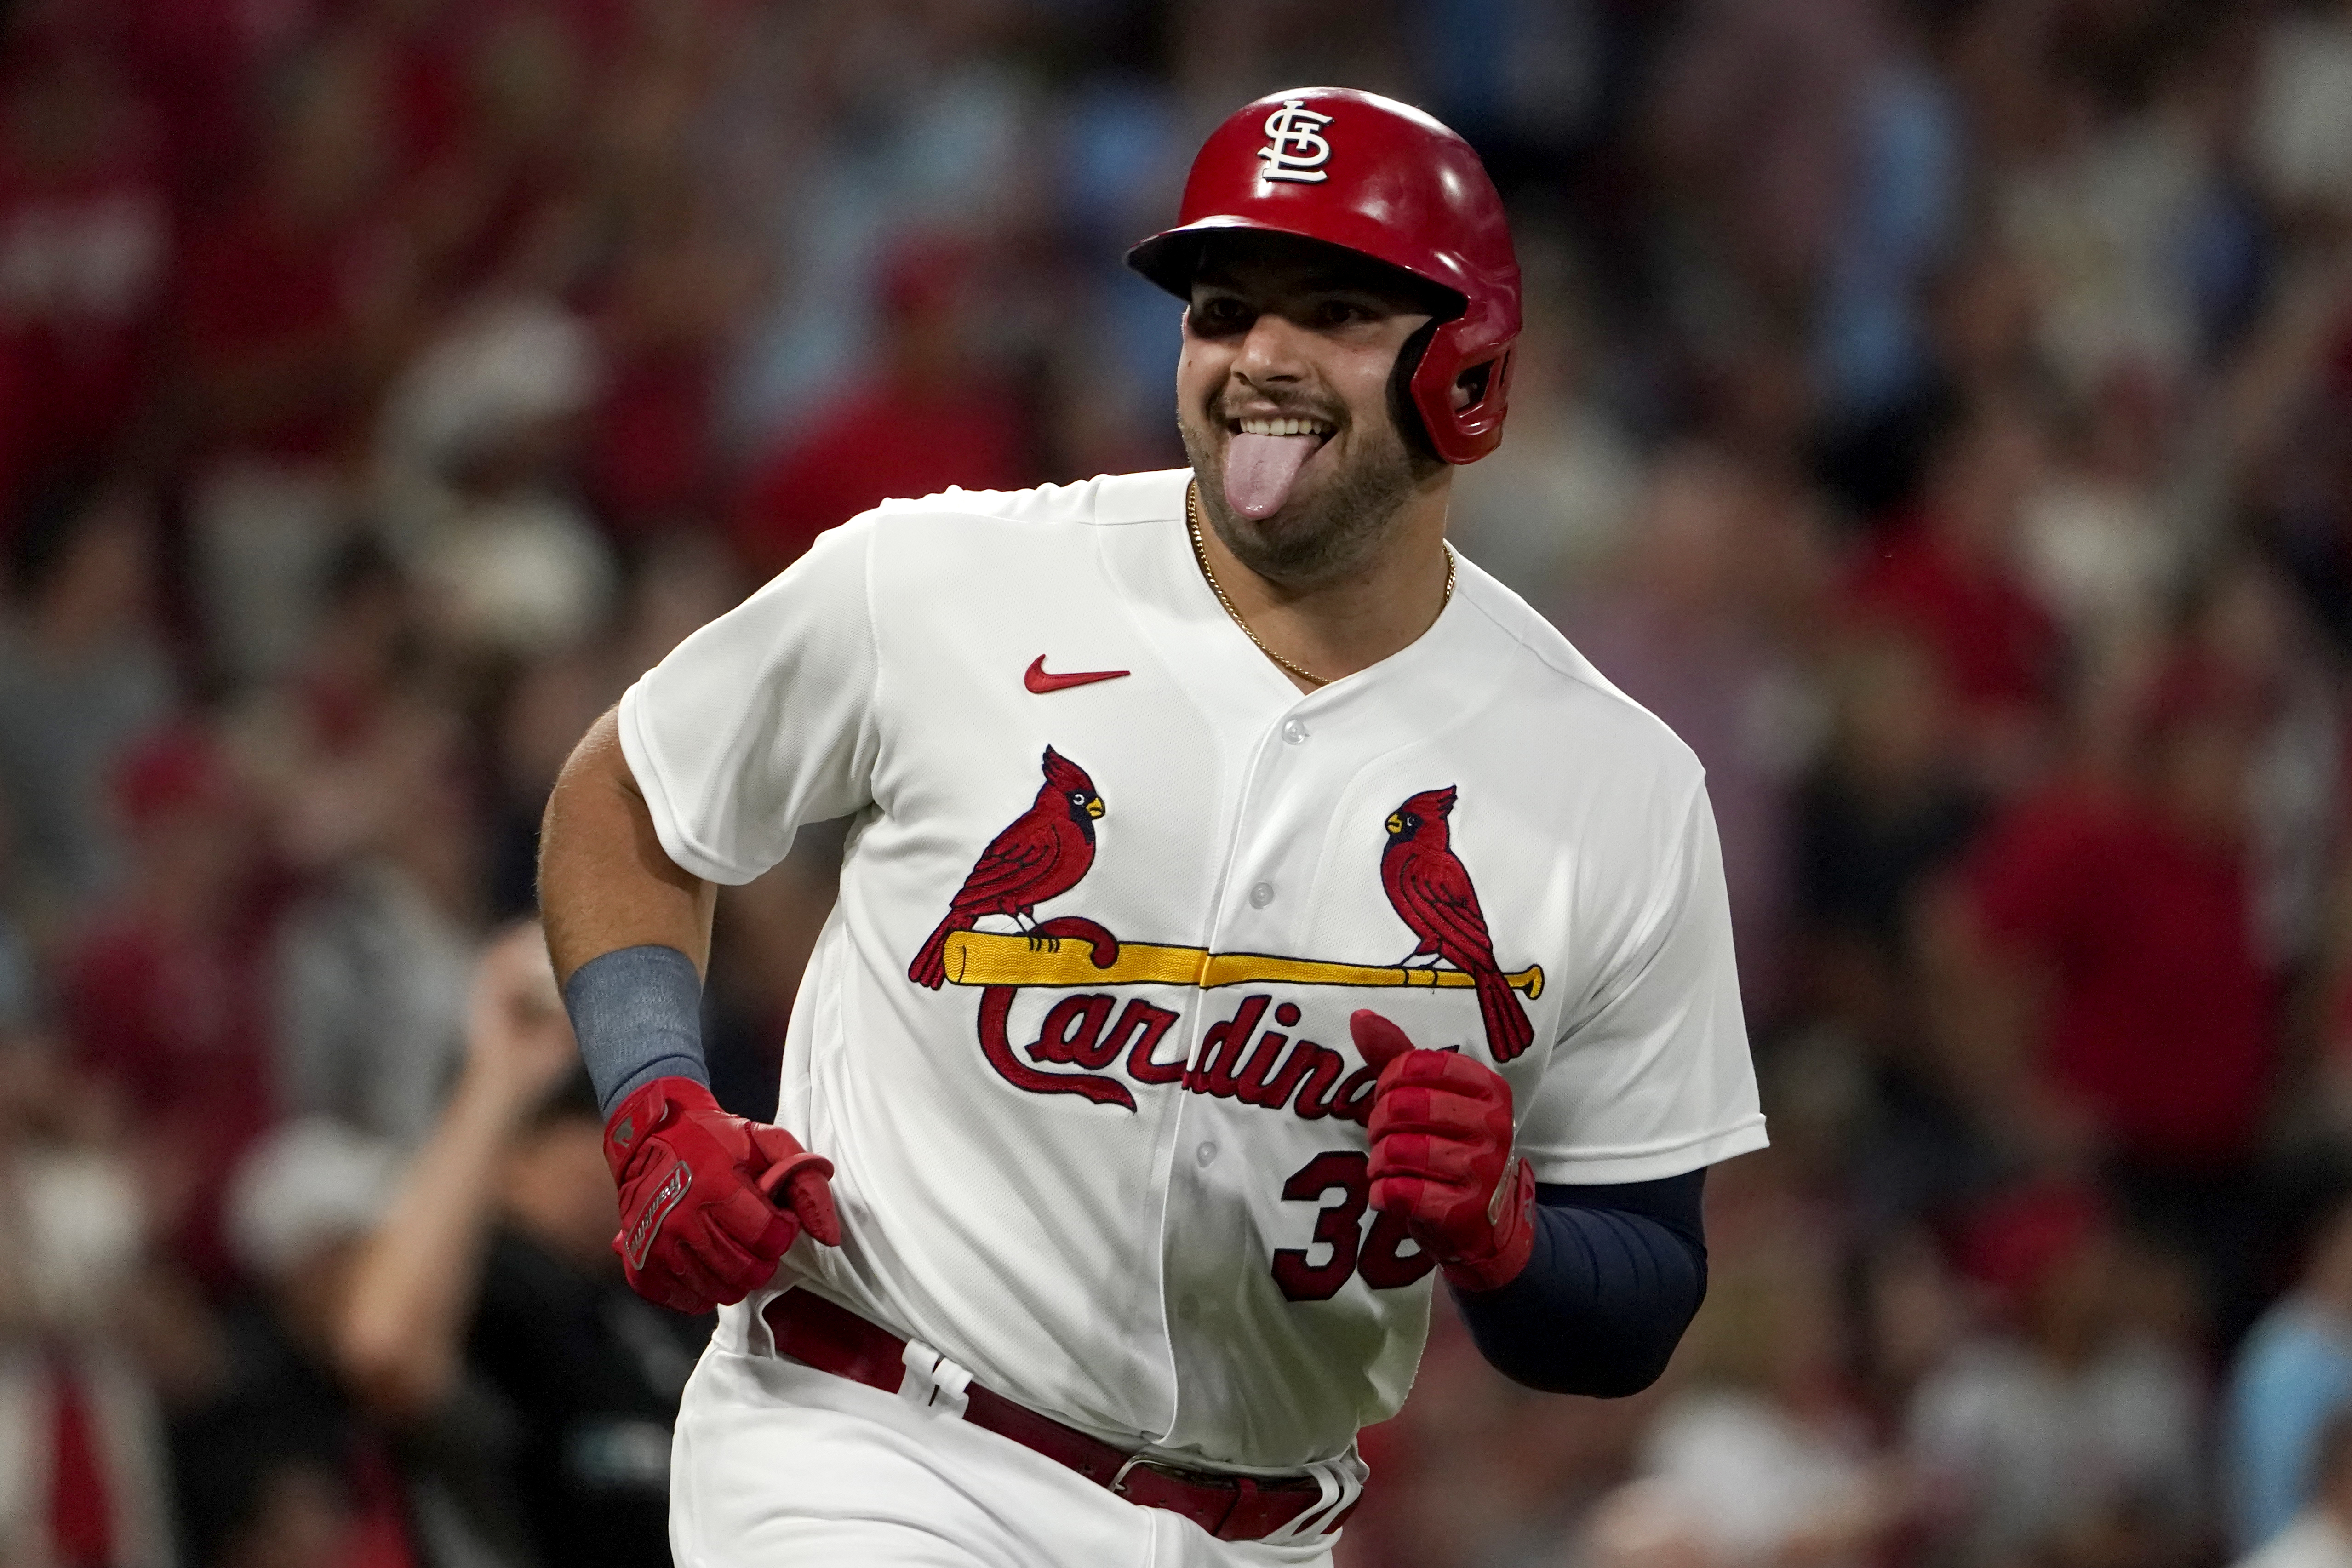 Two Yepez HRs, Goldschmidt 4 for 4, Cards top Marlins